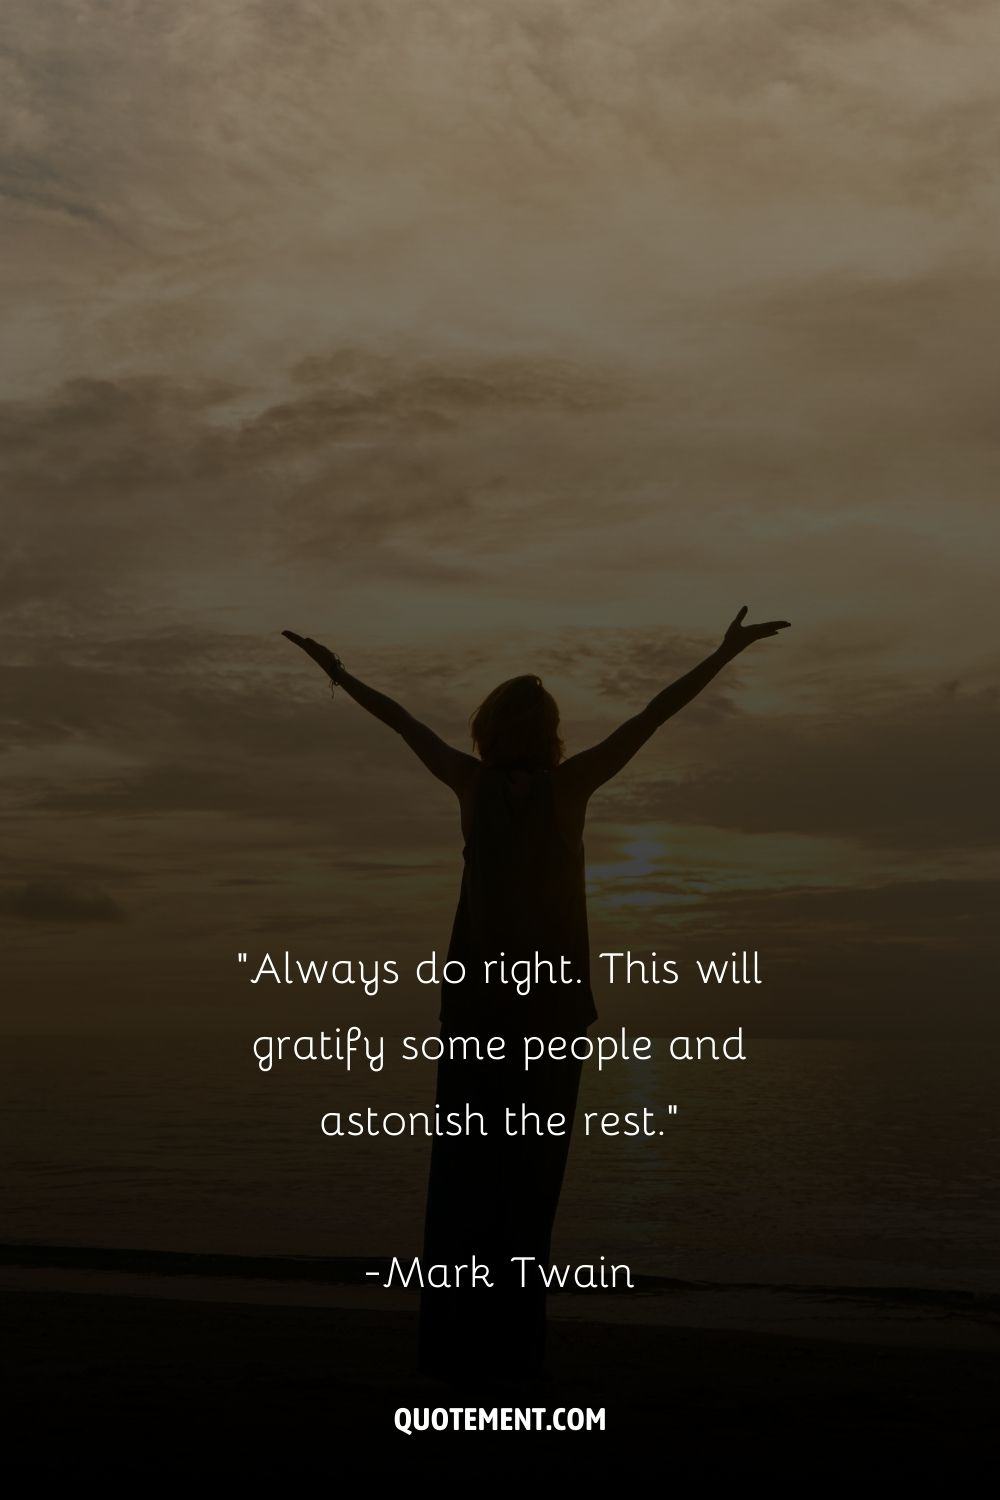 a woman at the beach with her arms raised representing daily inspirational quote
